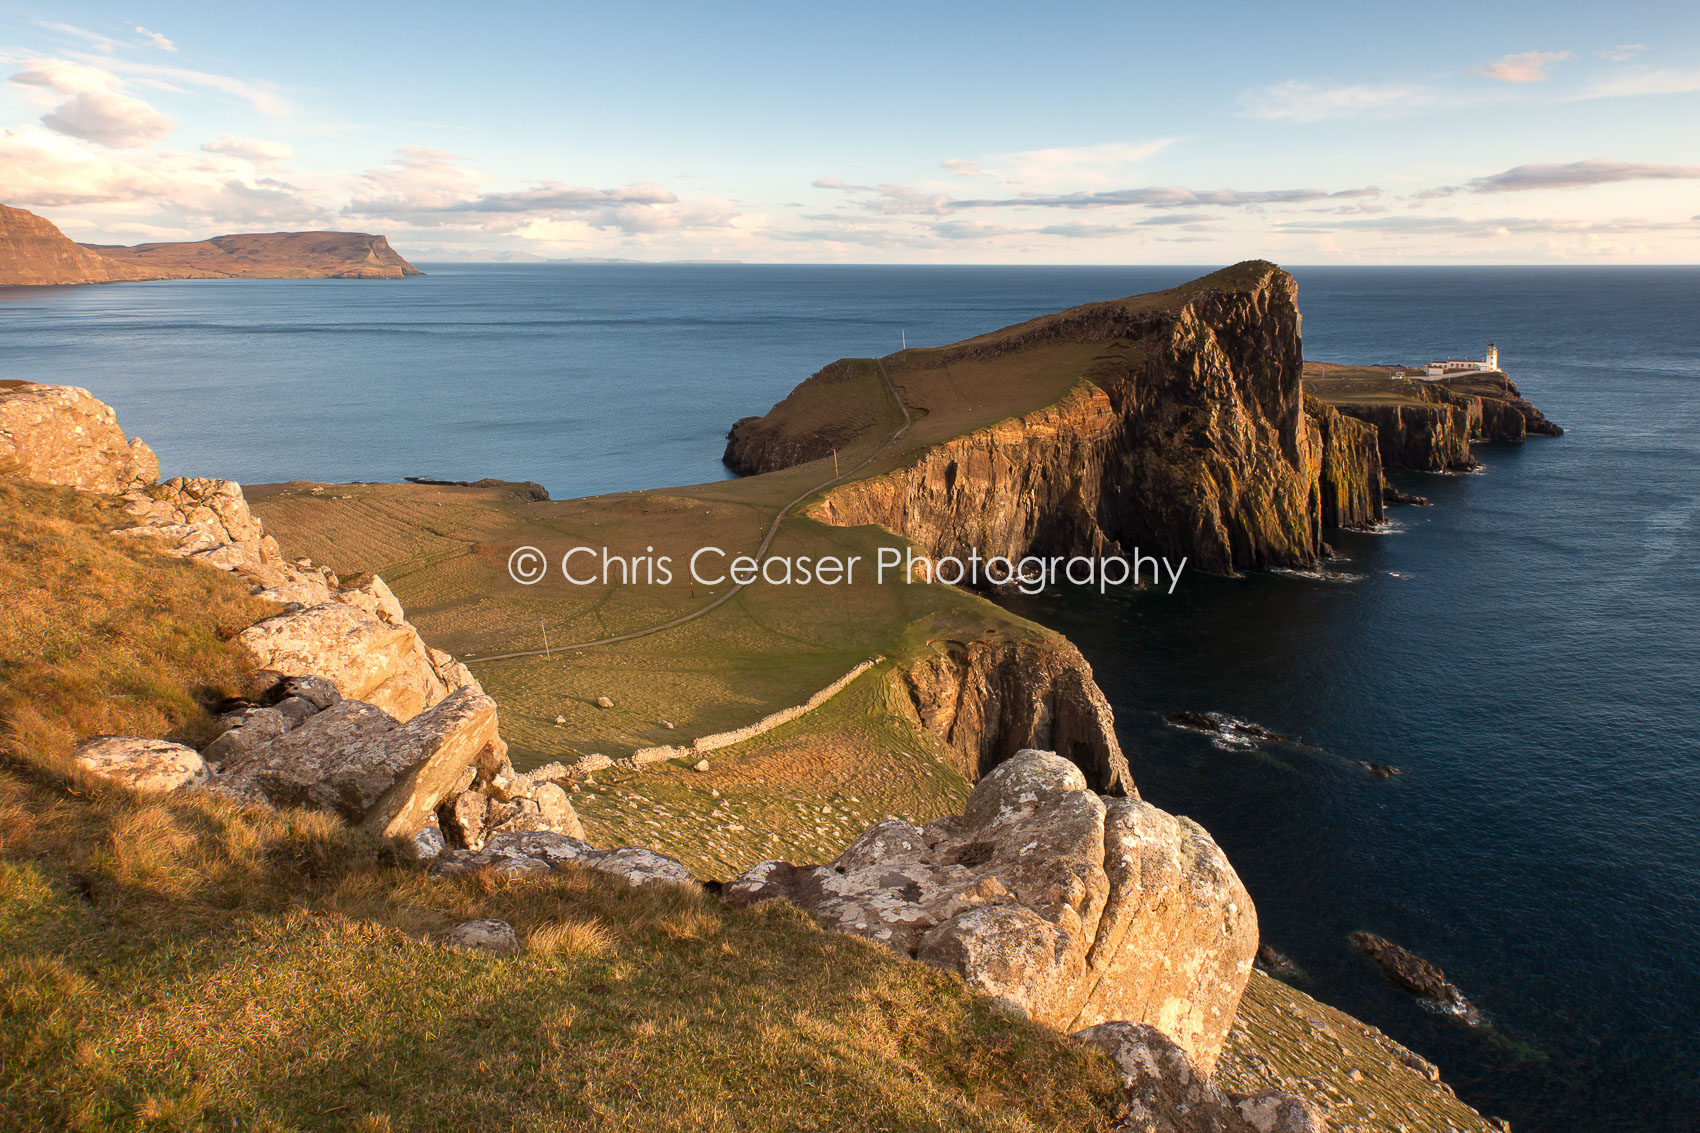 View From The Cliffs, neist point